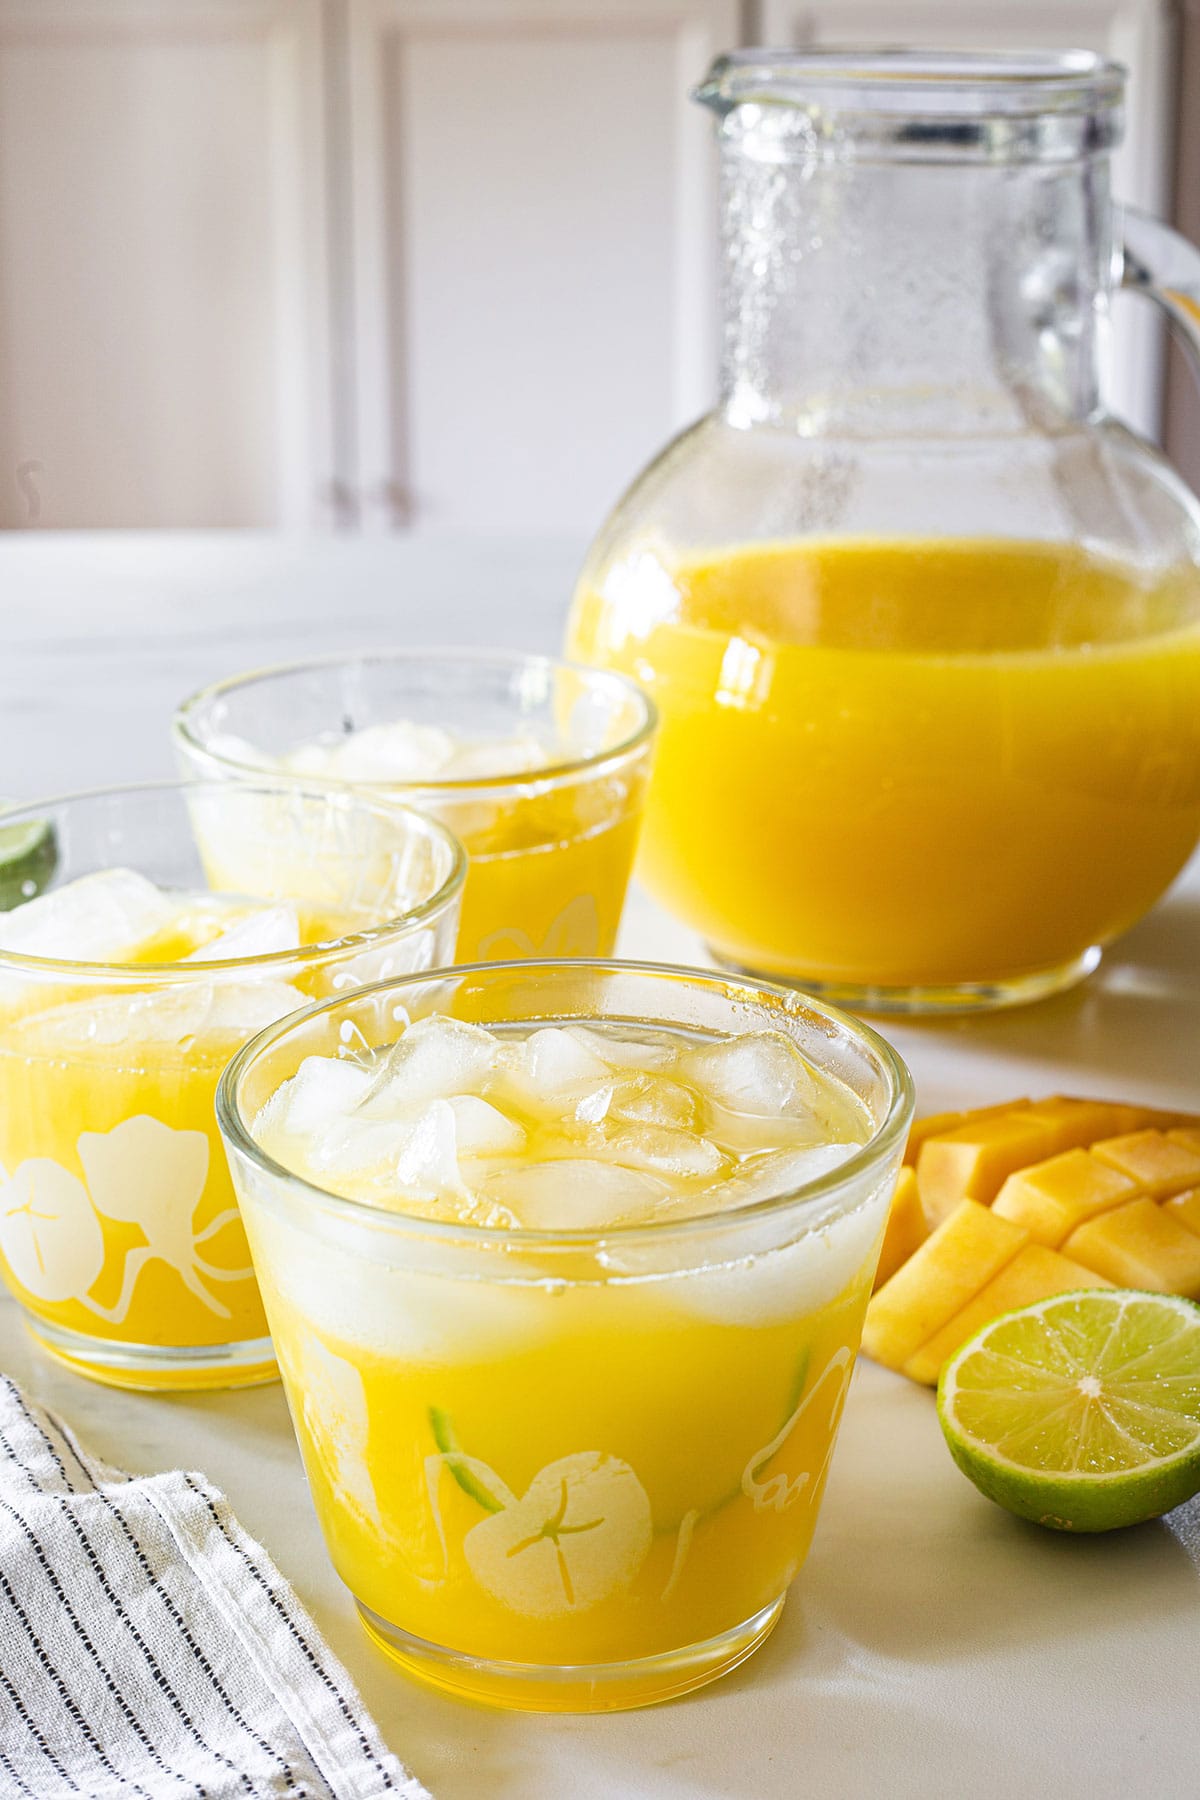 Agua de mango, also known as mango water in glasses with ice and a pitcher on the background.